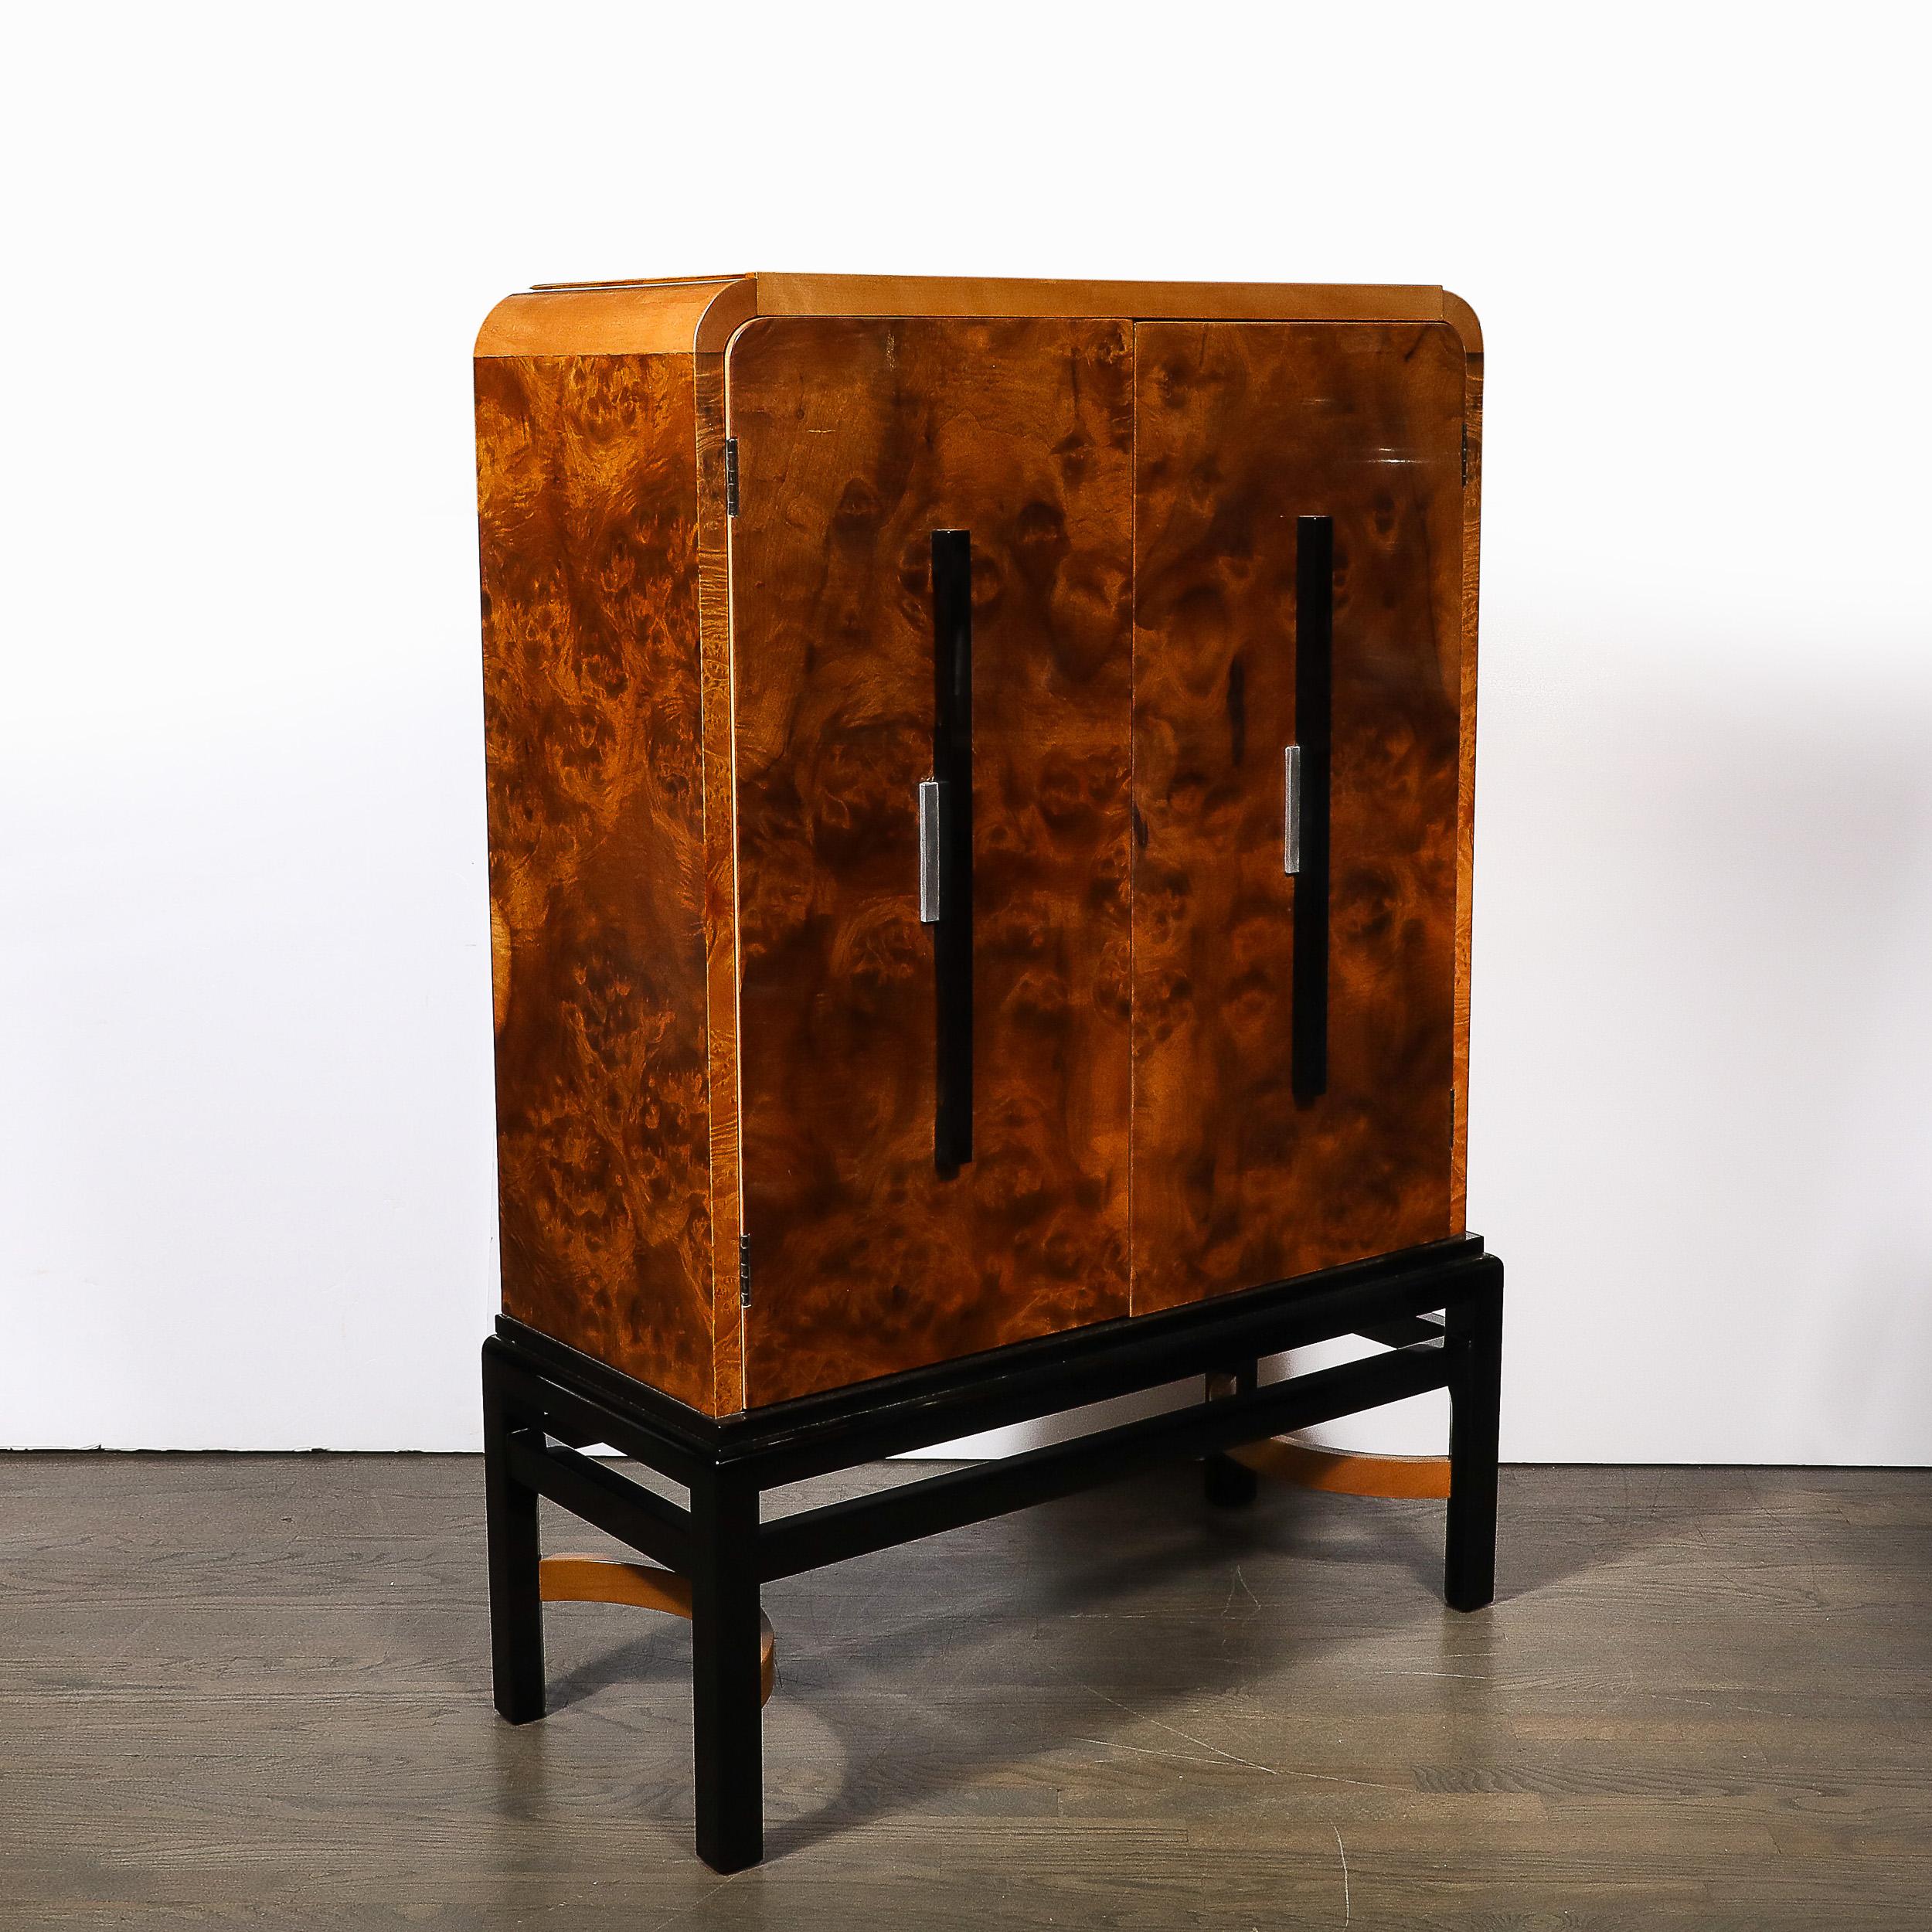 This exquisite and thoughtfully designed Art Deco Streamlined Machine Age Burled Walnut & Black Lacquer Bar Cabinet w/ Aluminum Pulls is by the esteemed designer Donald Deskey for the Hastings Company and originates from the Untied States, Circa